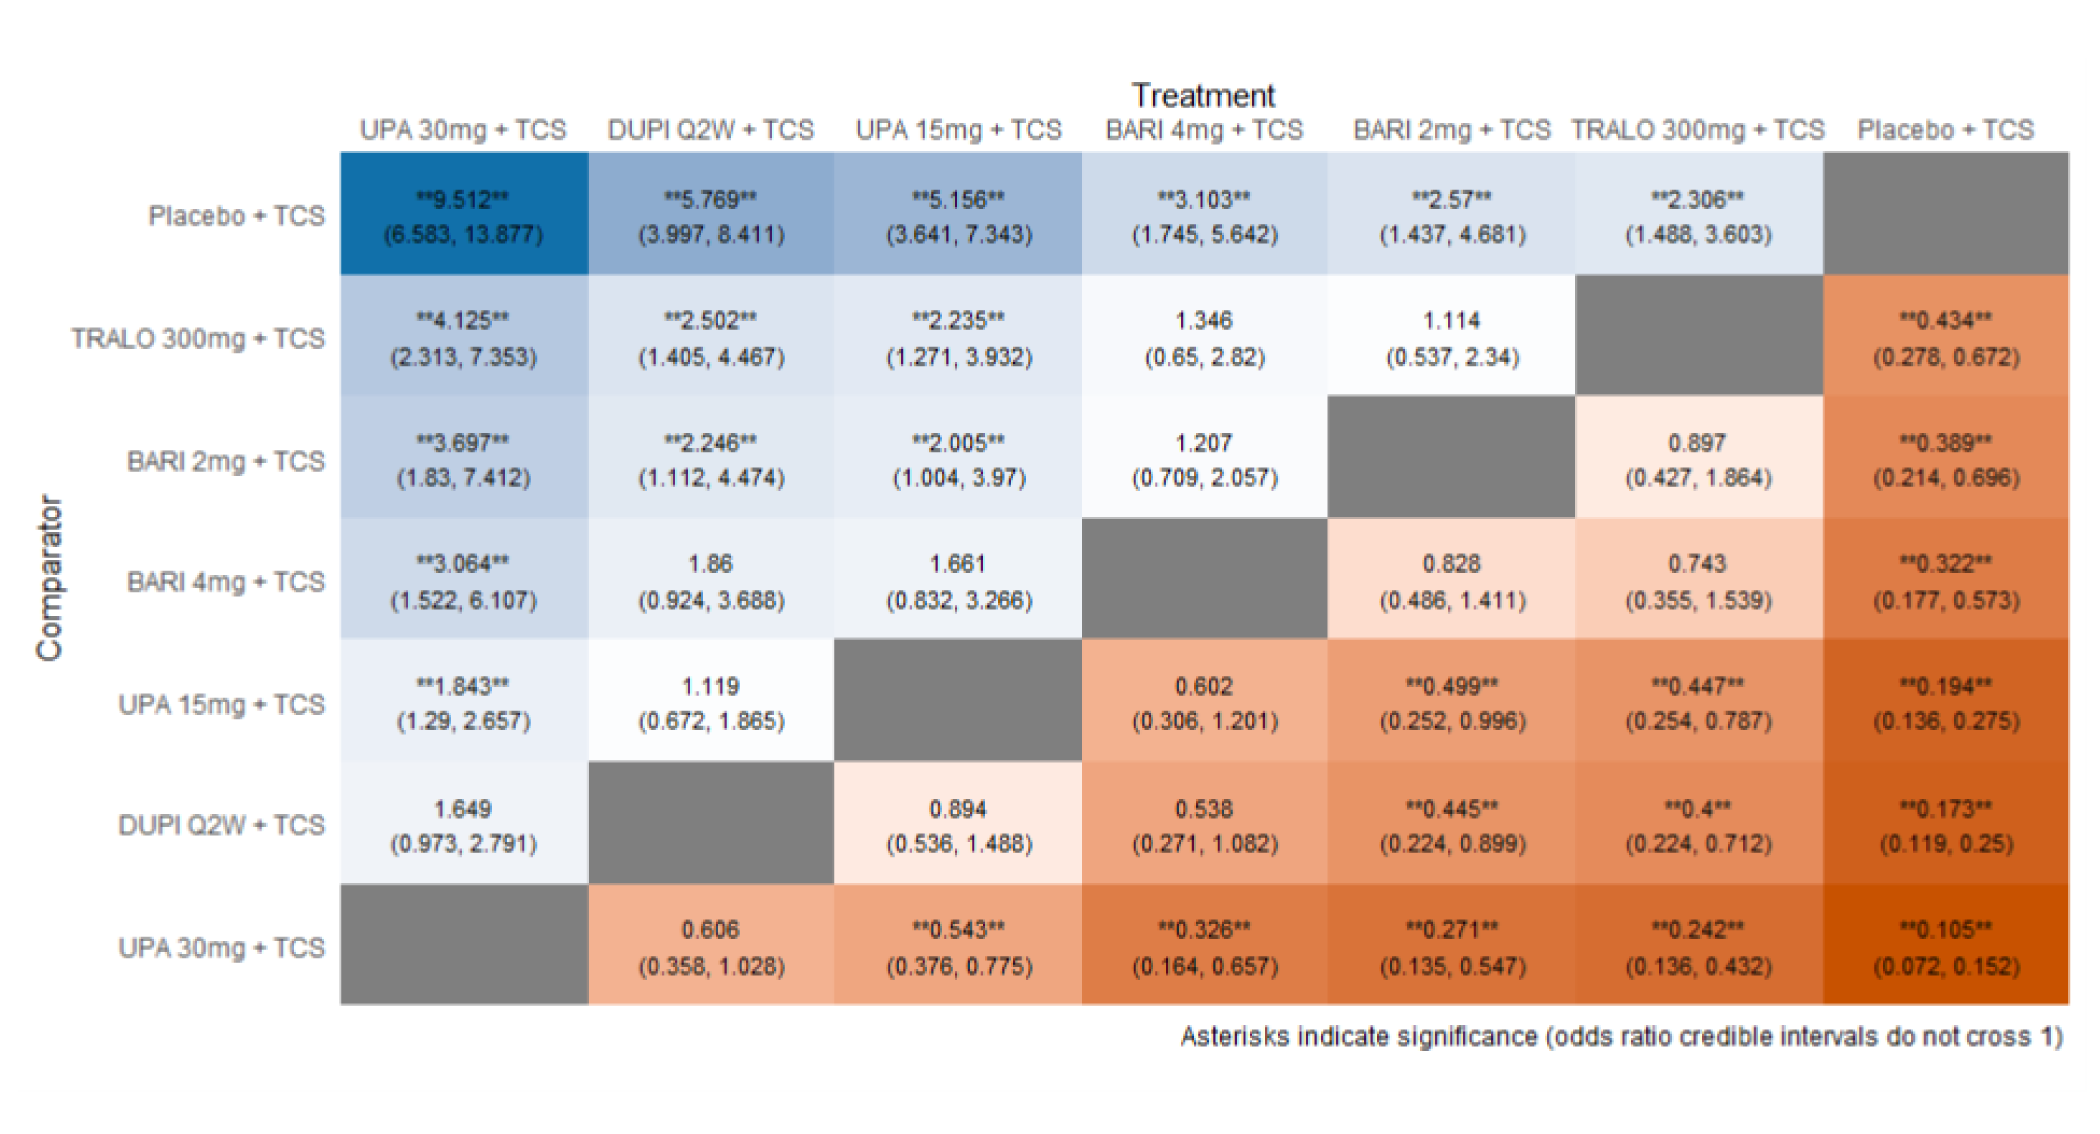 Figure depicts the league table of combination randomized controlled trials, including baricitinib 2 mg, baricitinib 4 mg, upadacitinib 30 mg, upadacitinib 15 mg, tralokinumab, and dupilumab, each with added topical corticosteroids, and placebo.